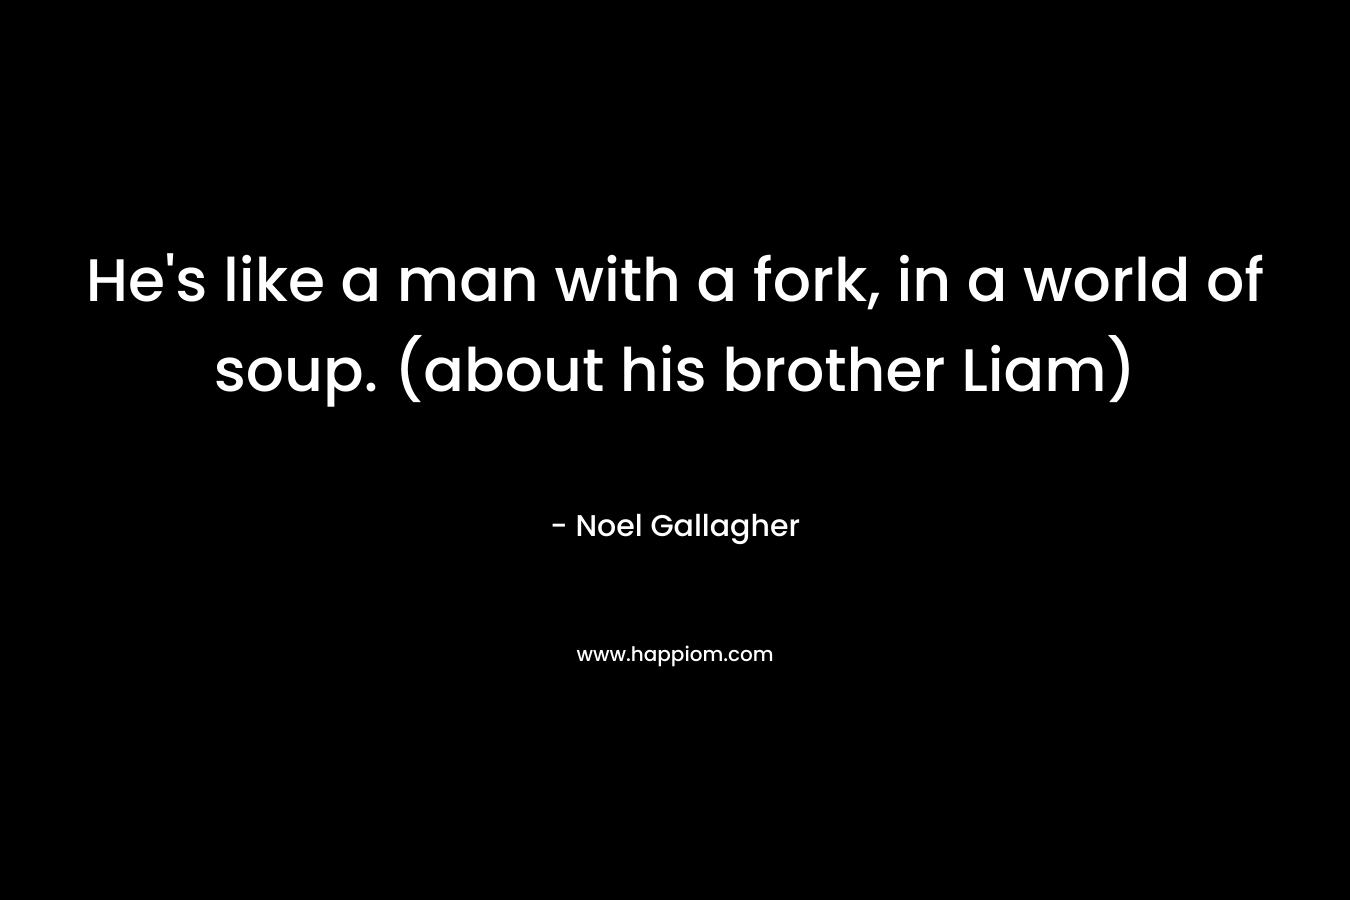 He's like a man with a fork, in a world of soup. (about his brother Liam)